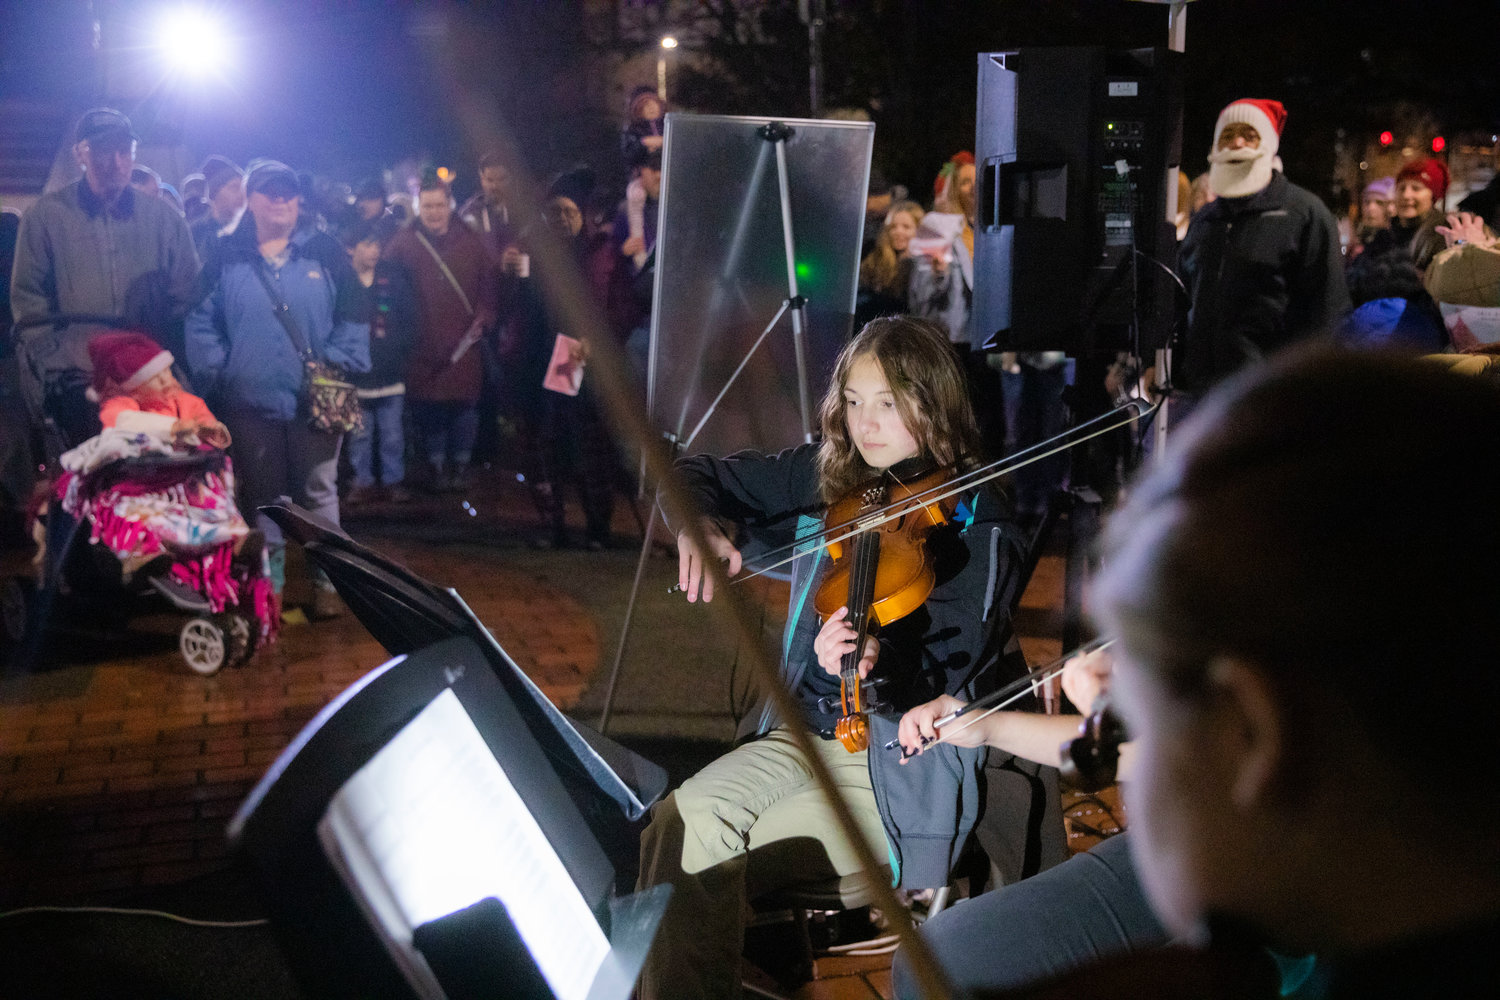 Members of the Centralia High School and Centralia Middle School orchestra bands perform “Jingle Bells,” Friday night at George Washington Park before a Christmas Tree Lighting celebration.